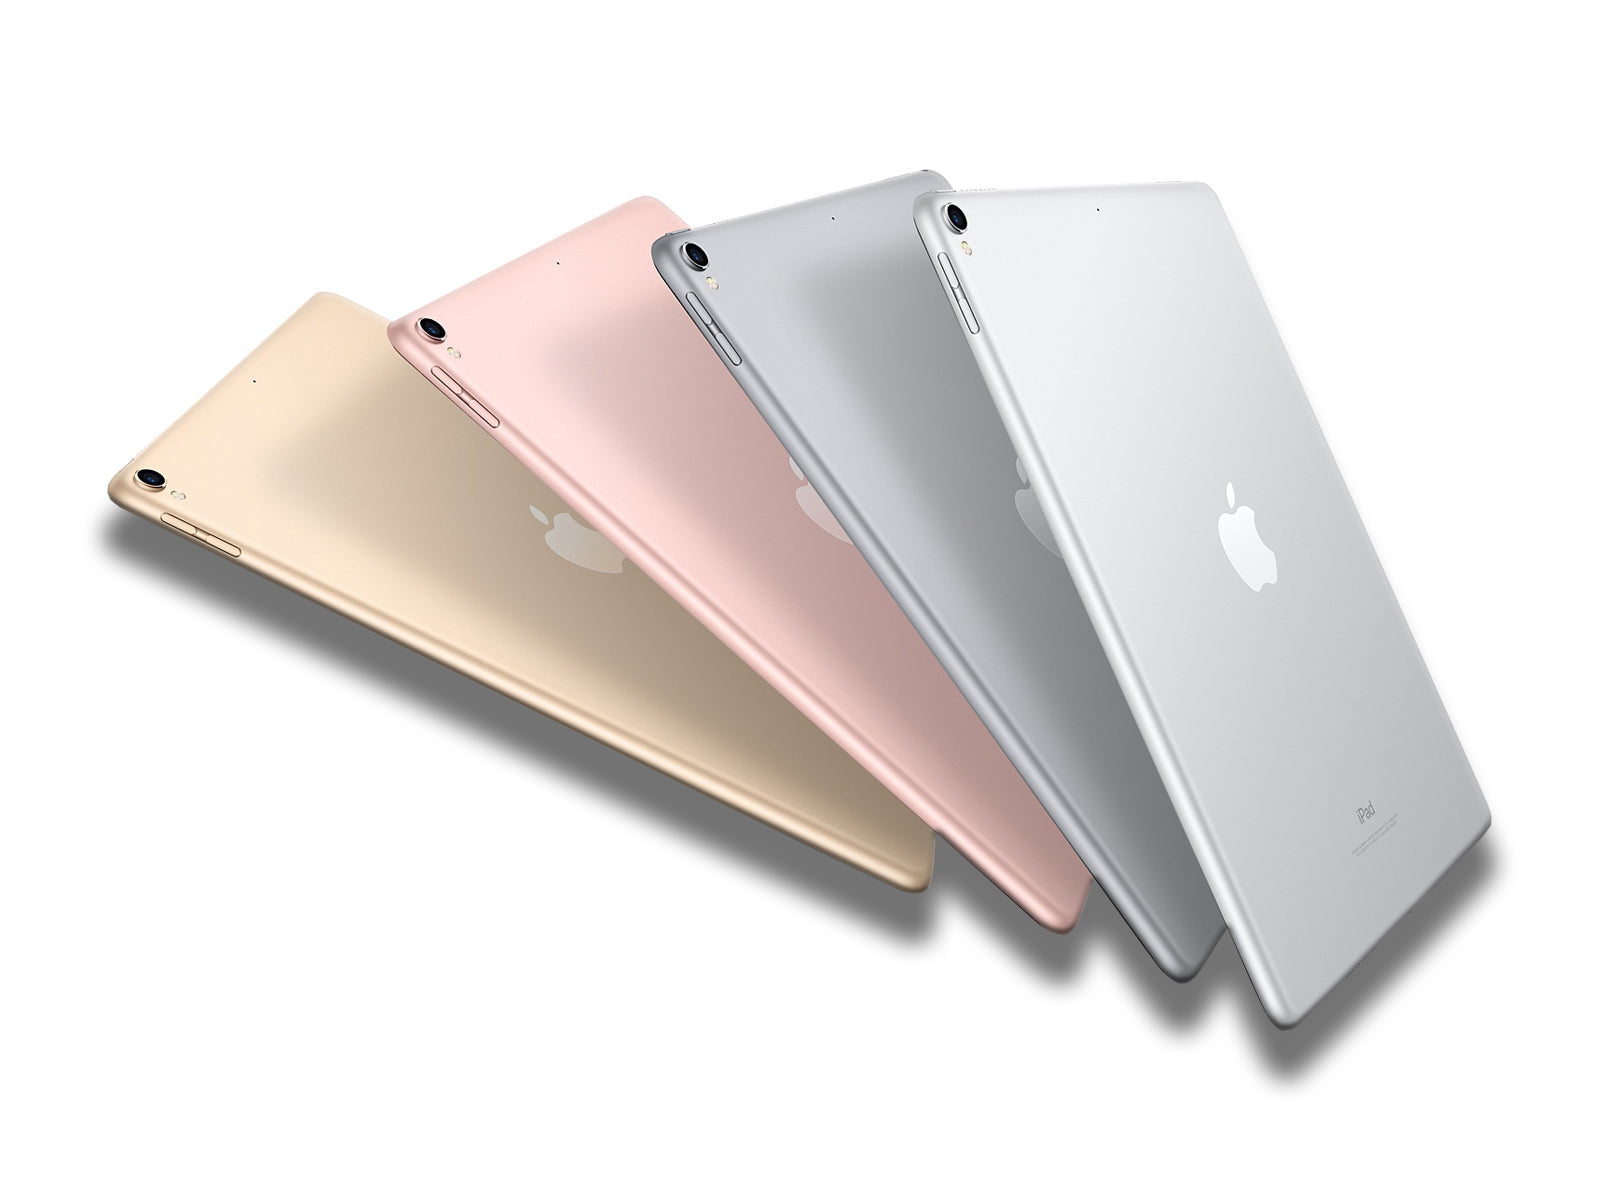 Image shows all colours of the Apple iPad Pro 10.5-inch 